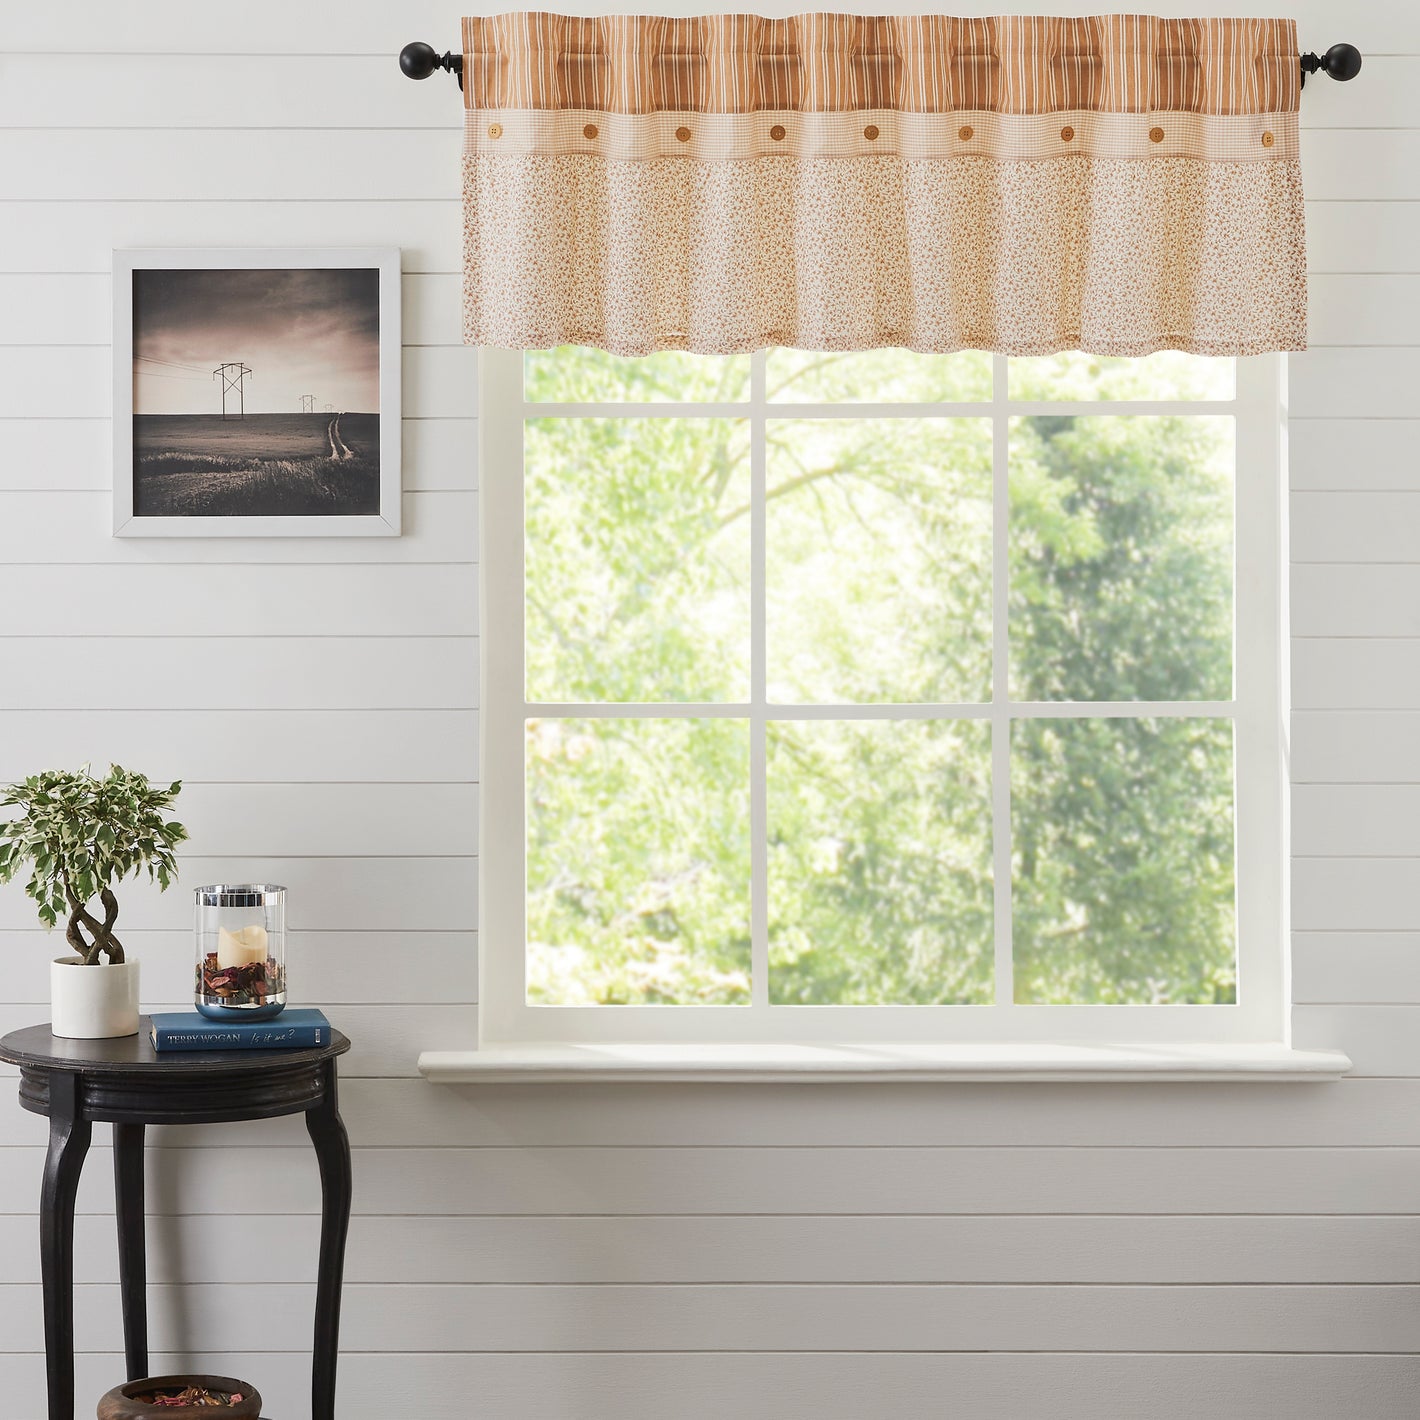 April & Olive Camilia Ruffled Valance 19x72 By VHC Brands